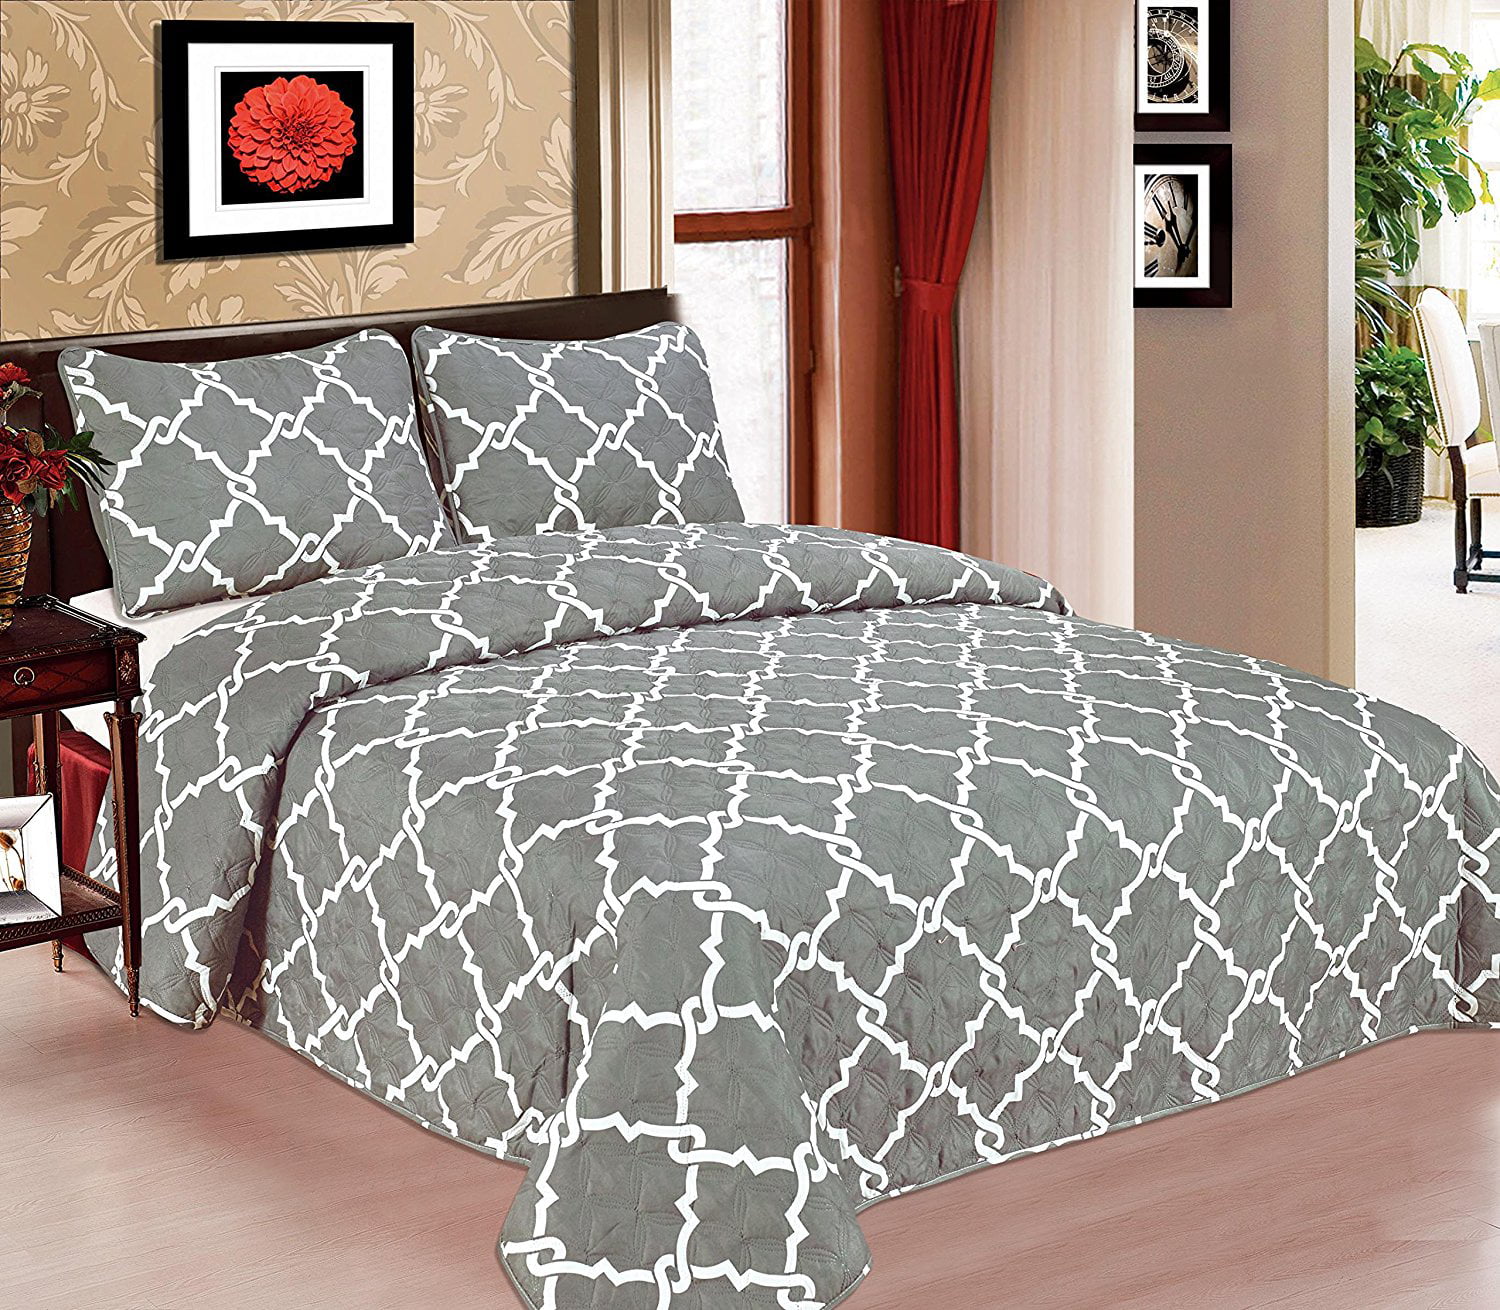 Galaxy Bedspread 3-Piece Quilt Set Soft Quilted Bedding Coverlet NEW Arrival SAL 